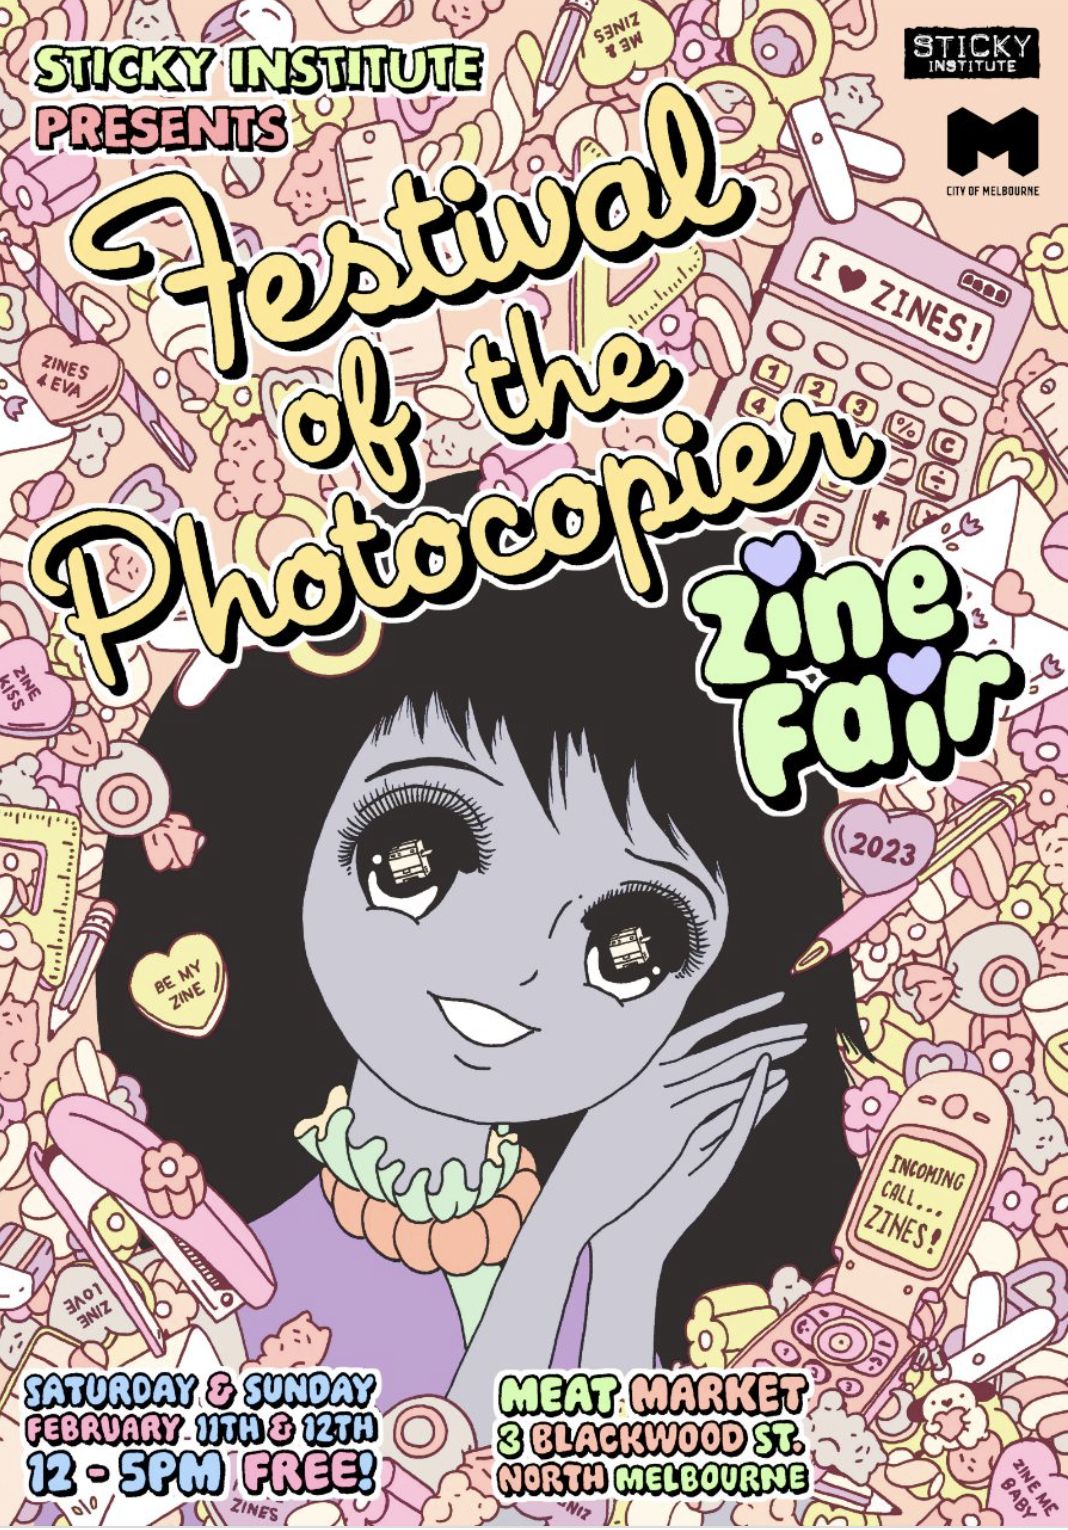 Surprise! Stallholder applications for the Festival of the Photocopier are open now! Here’s the link the application form: https://my.mtr.cool/dyaftmfaezBig for Merv Heers who created 2023’s poster!